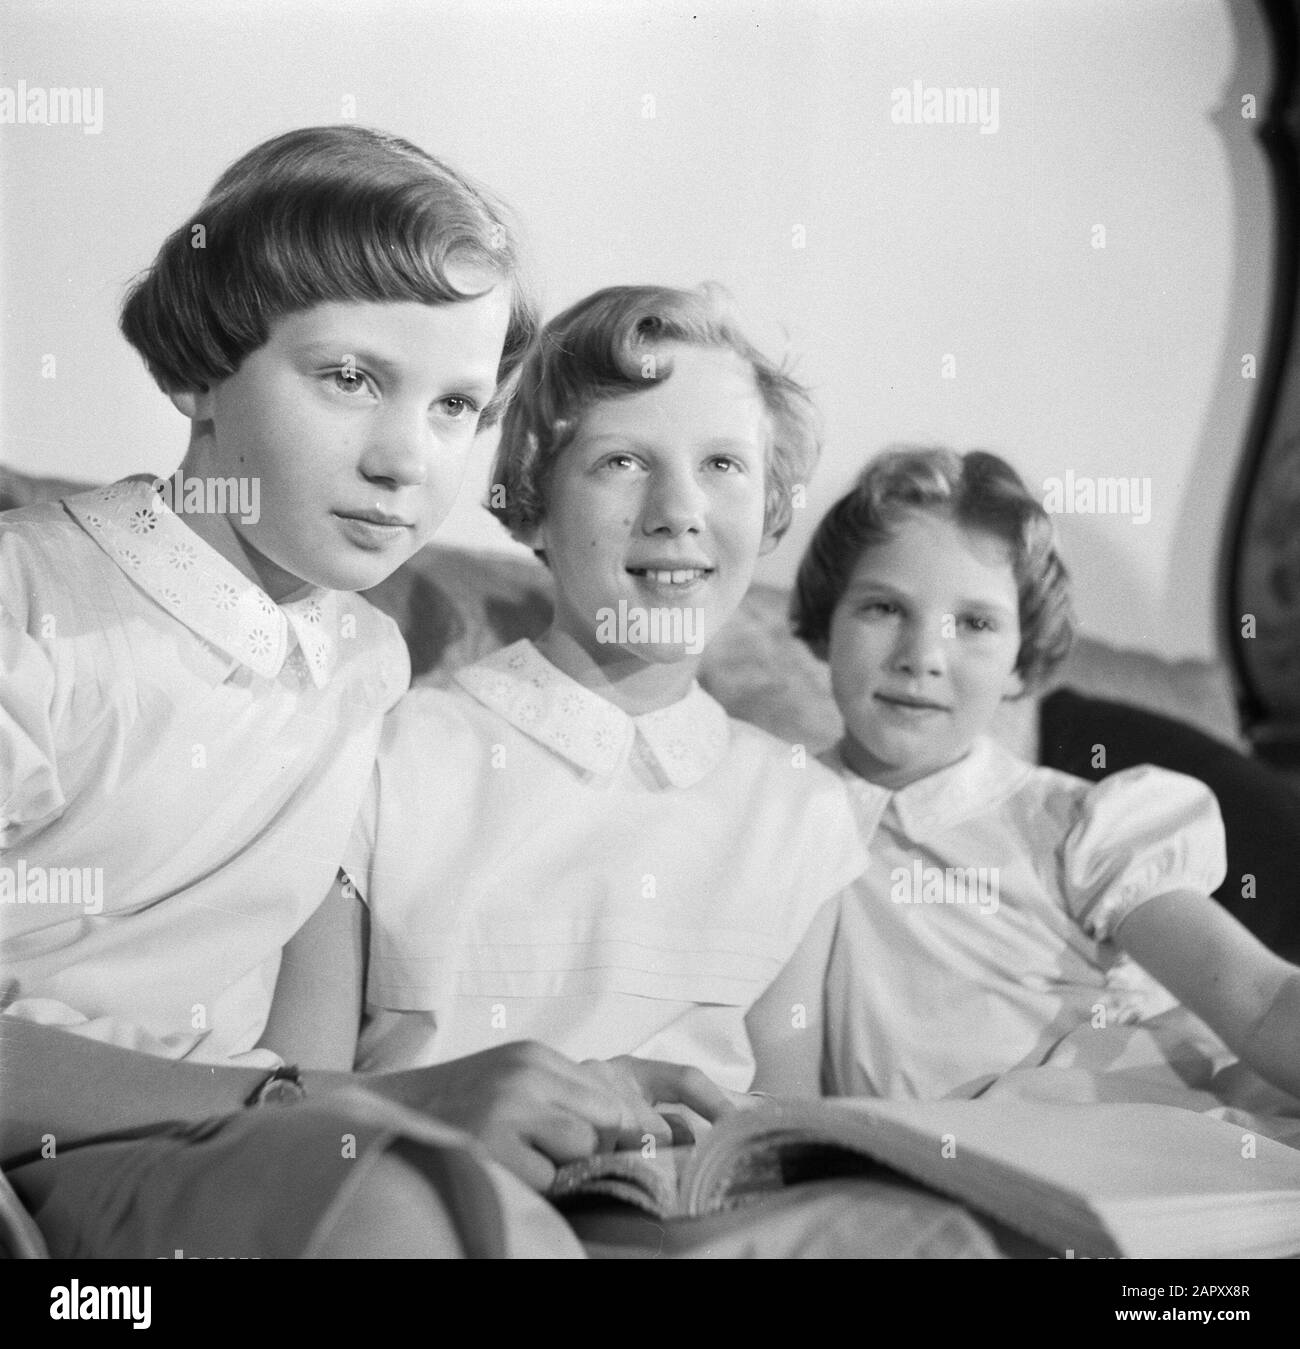 family-photos-of-the-danish-royal-family-vlnr-princess-benedikte-princess-margrethe-and-princess-anne-marie-with-a-book-on-the-bench-in-brockdorff-palace-date-march-1954-location-denmark-copenhagen-keywords-books-families-interiors-children-clocks-furniture-palaces-princesses-homes-benches-personal-name-anne-marie-princess-denmark-benedikte-princess-denmark-margrethe-crown-princess-denmark-2APXX8R.jpg